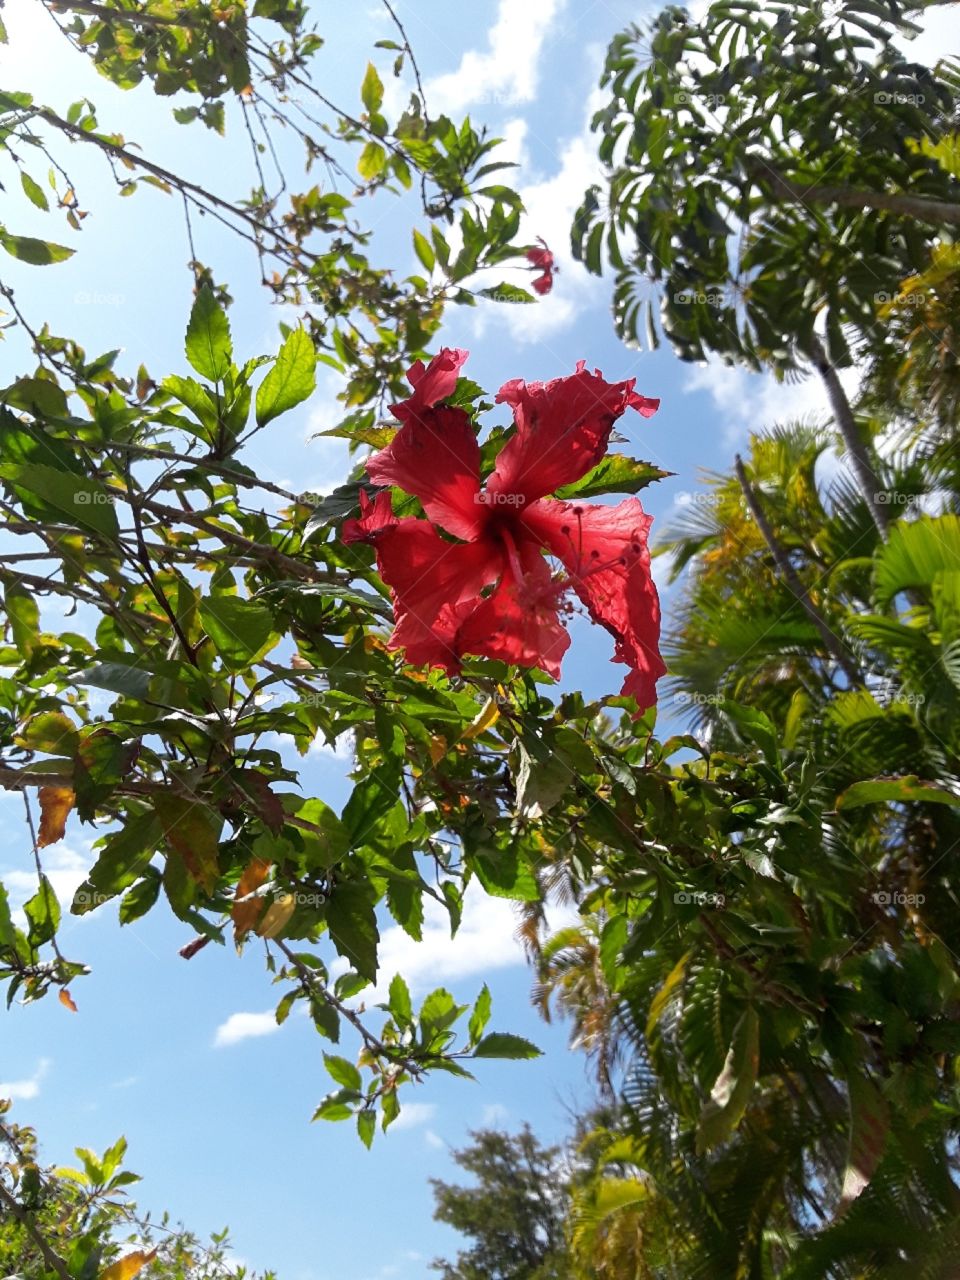 A red native flower to Long Bahama Island with both dark and light green leaves and a blue sky as the backdrop.